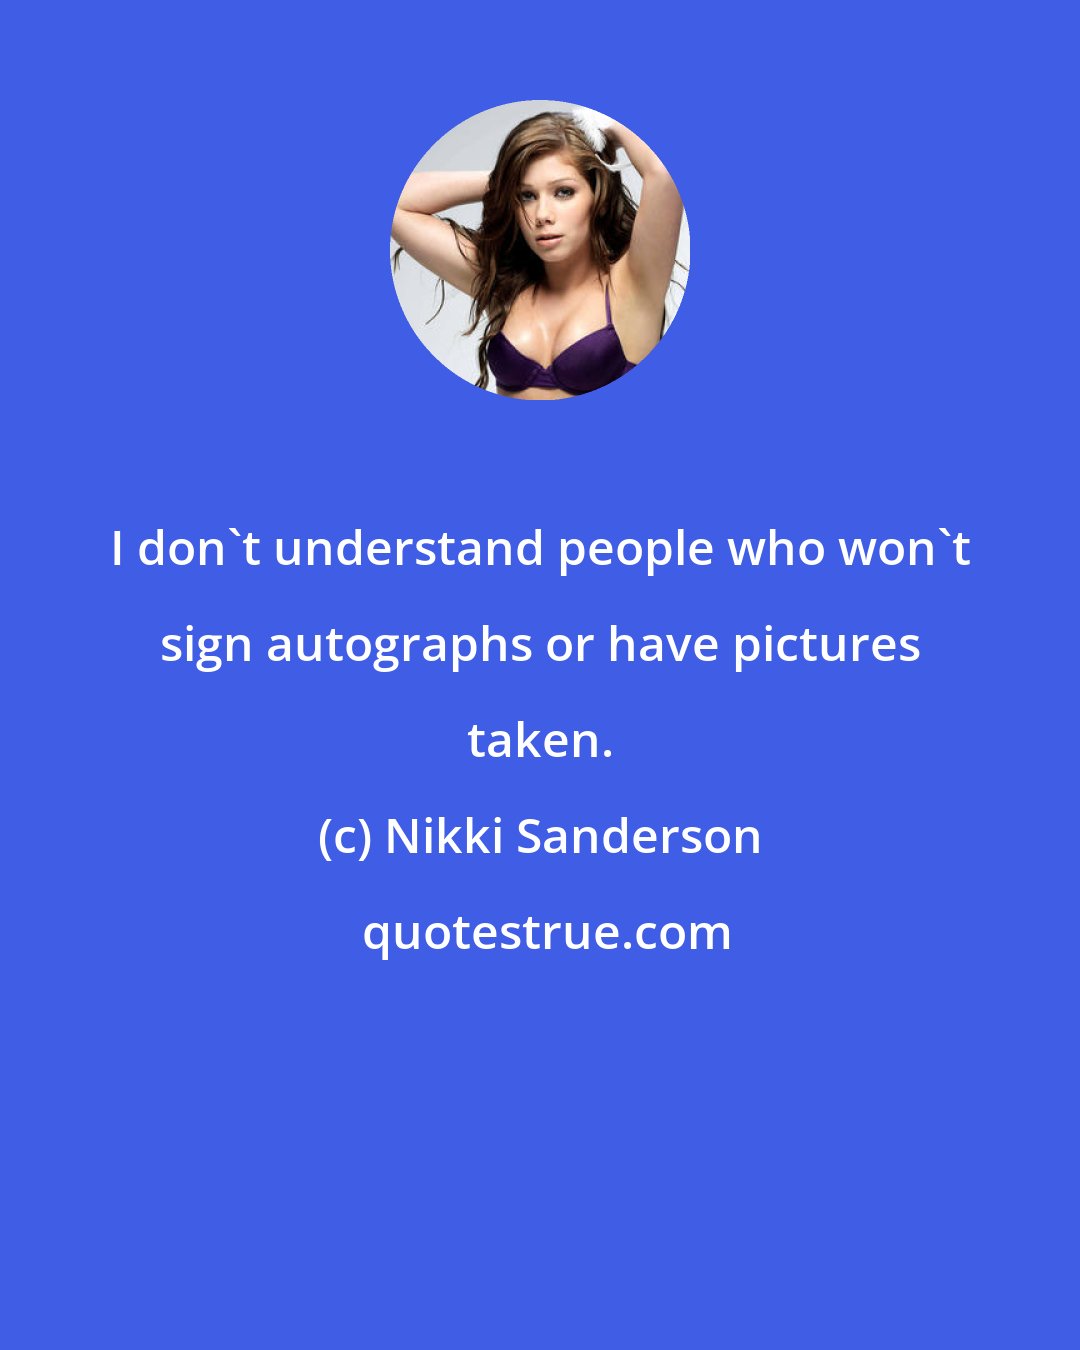 Nikki Sanderson: I don't understand people who won't sign autographs or have pictures taken.